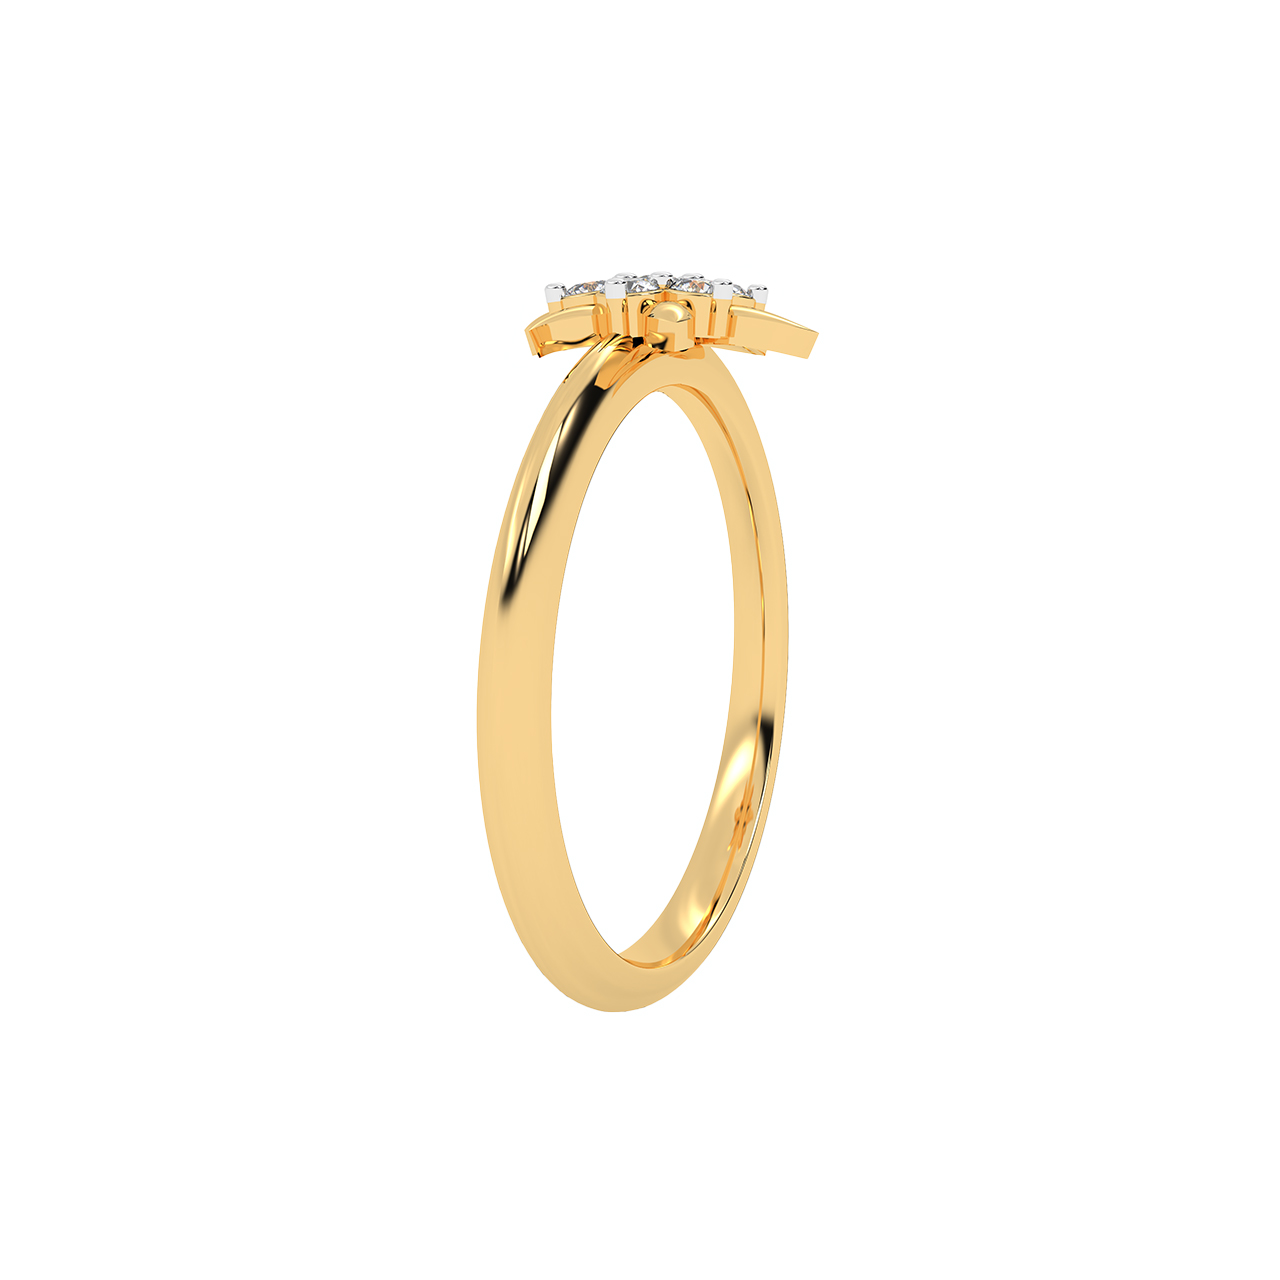 Gold Diamond Ring For Gifting